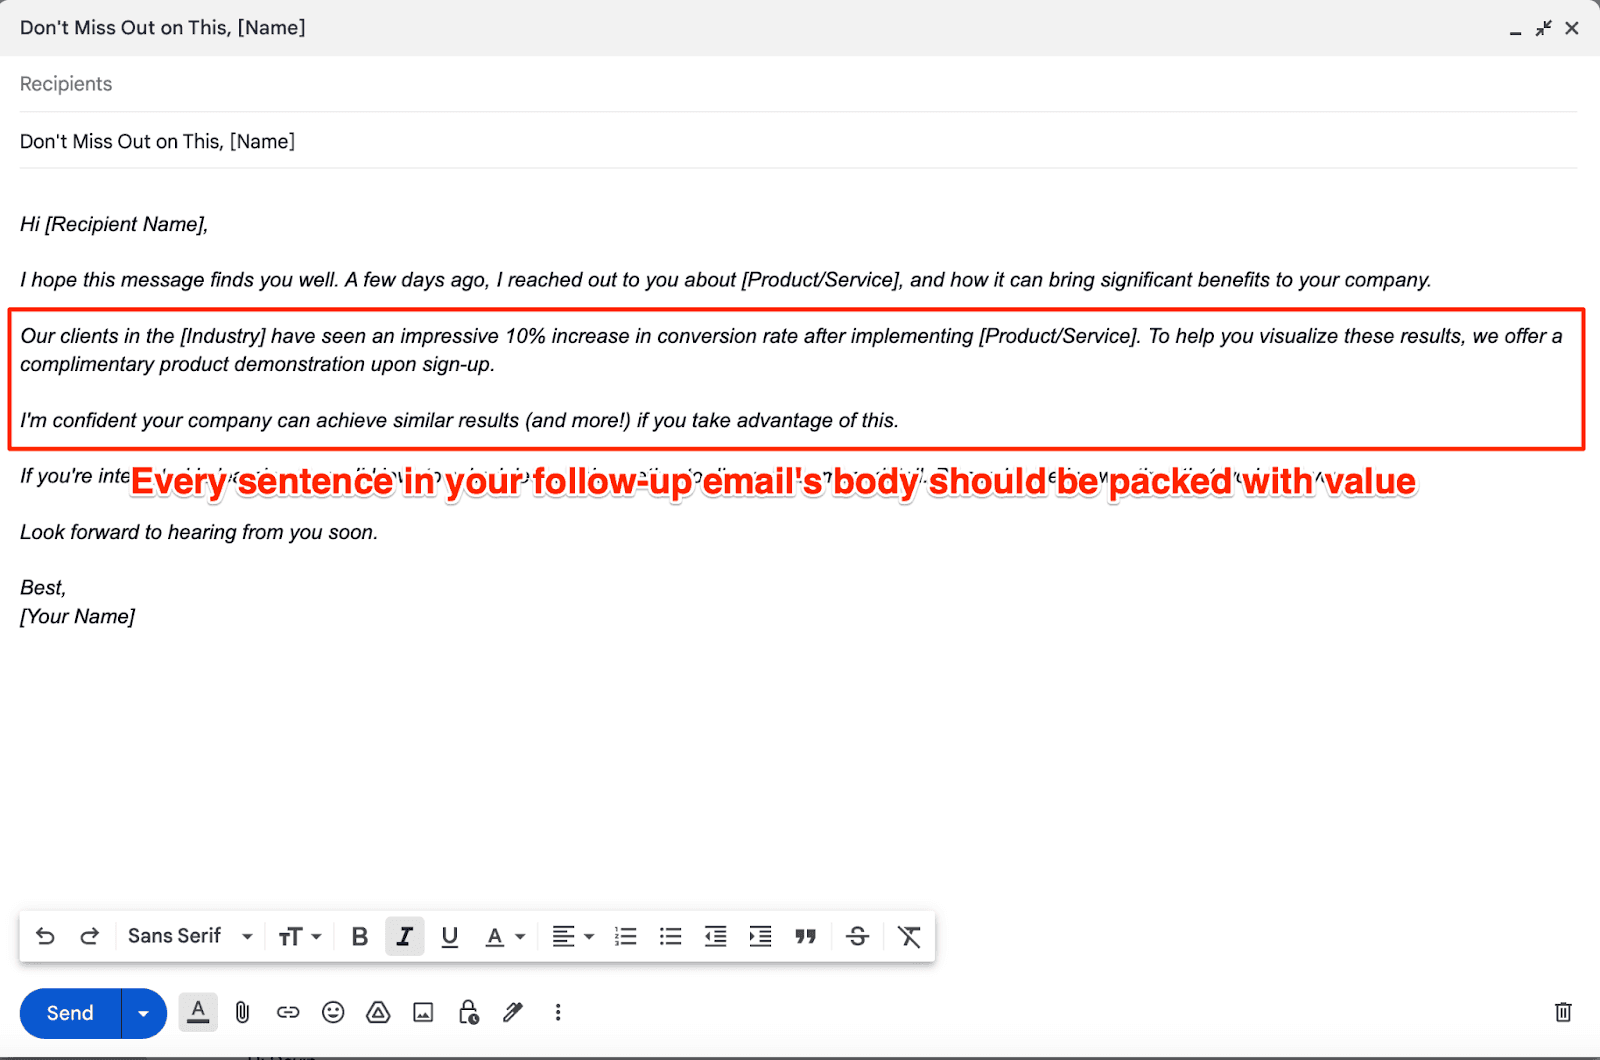 Body text in the email should be packed with value